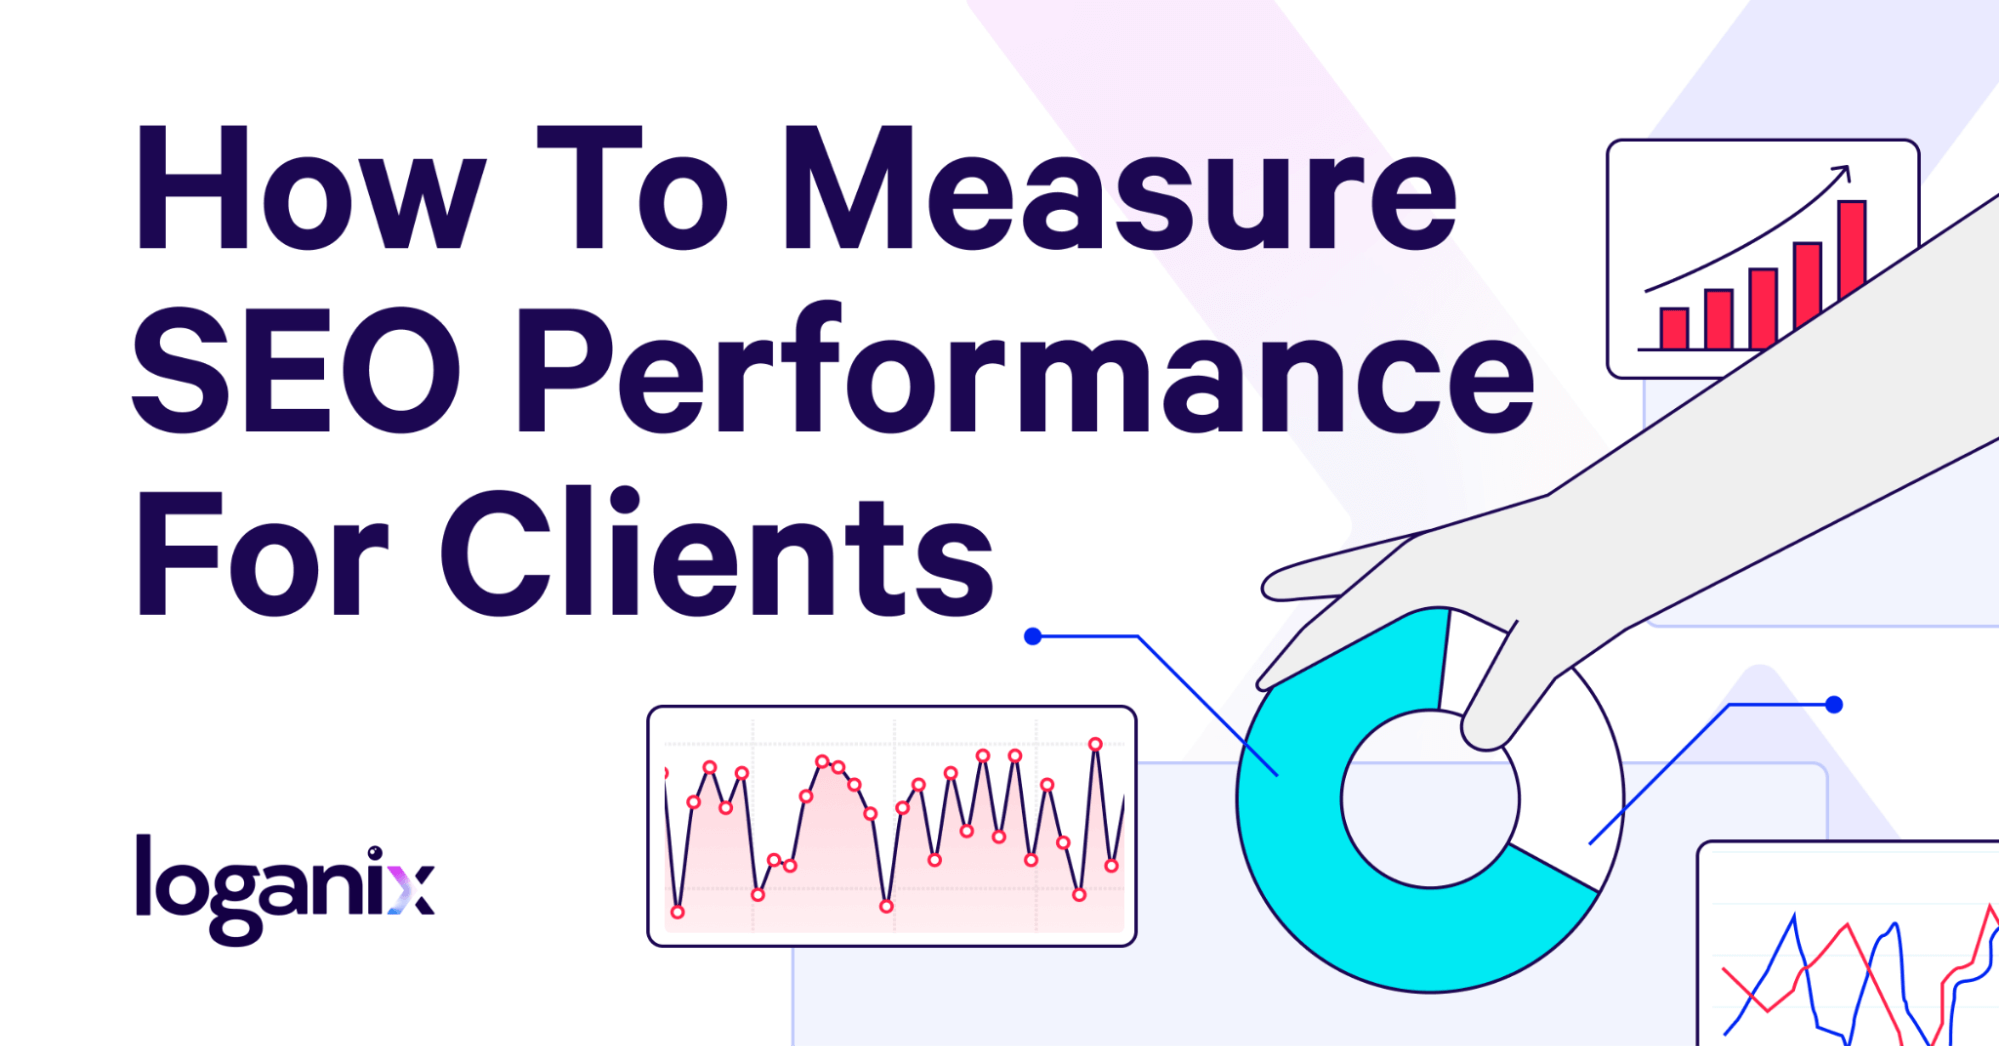 How To Measure SEO Performance For Clients